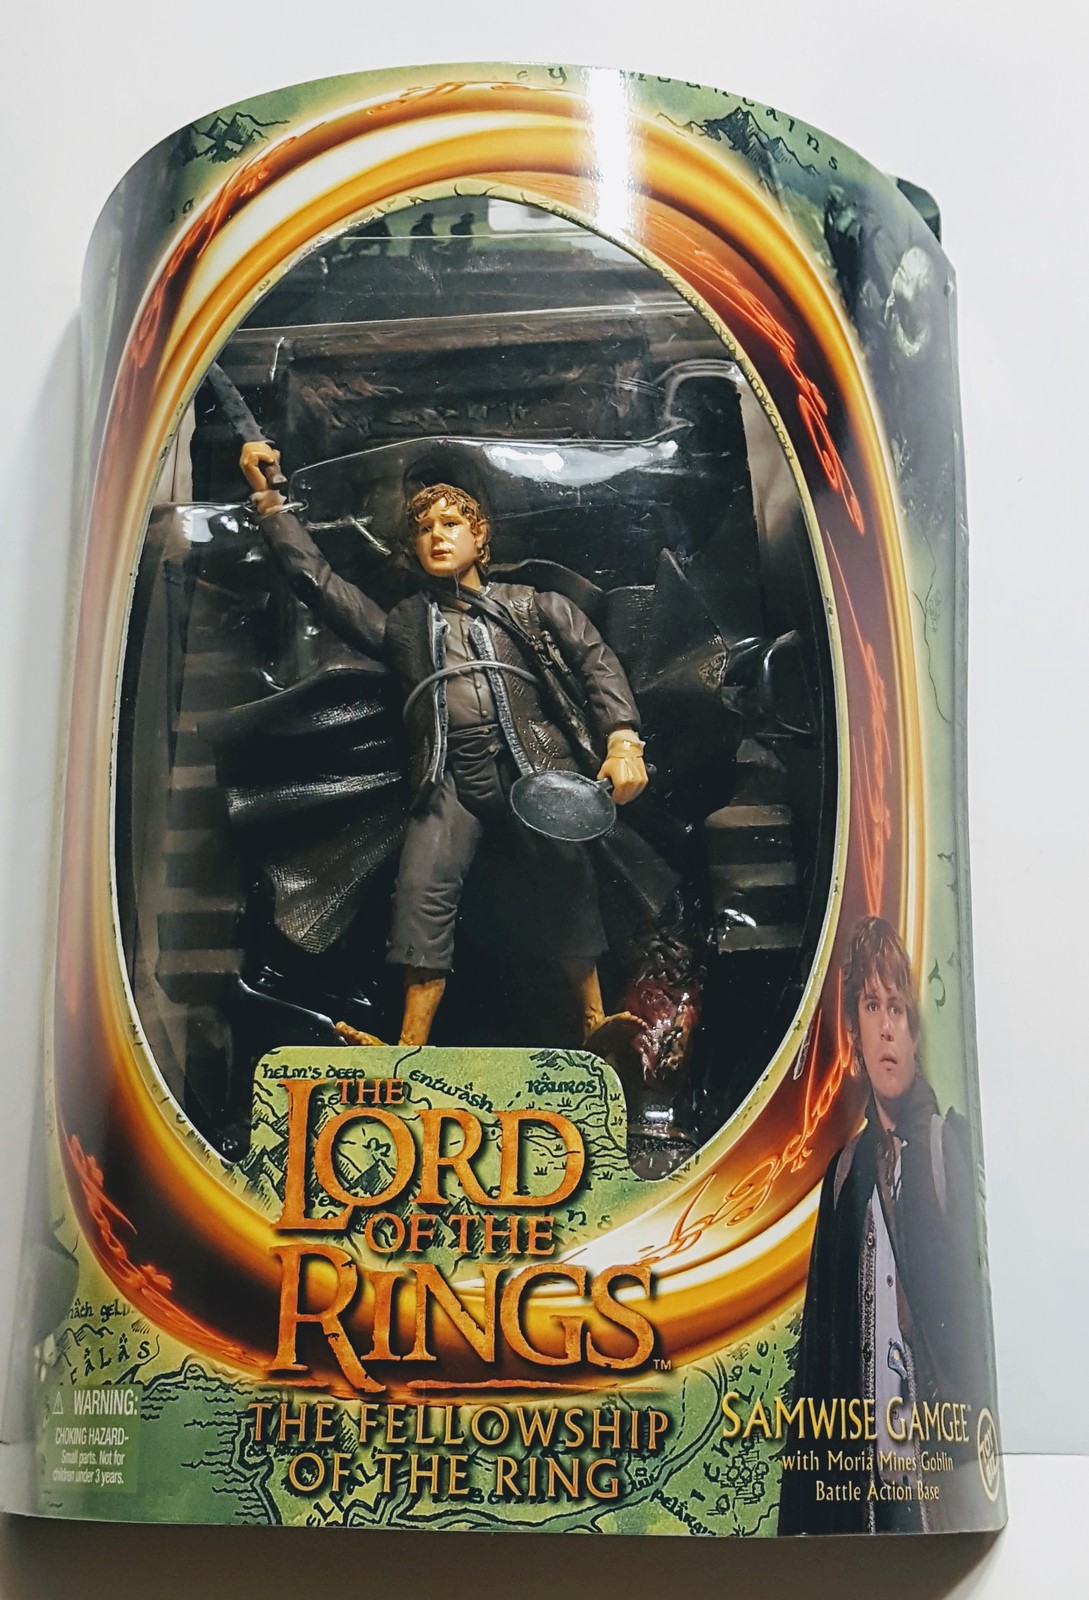 Samwise Gamgee  Lord of the Rings The fellowship of the ring Toy Biz New Sealed - $10.00